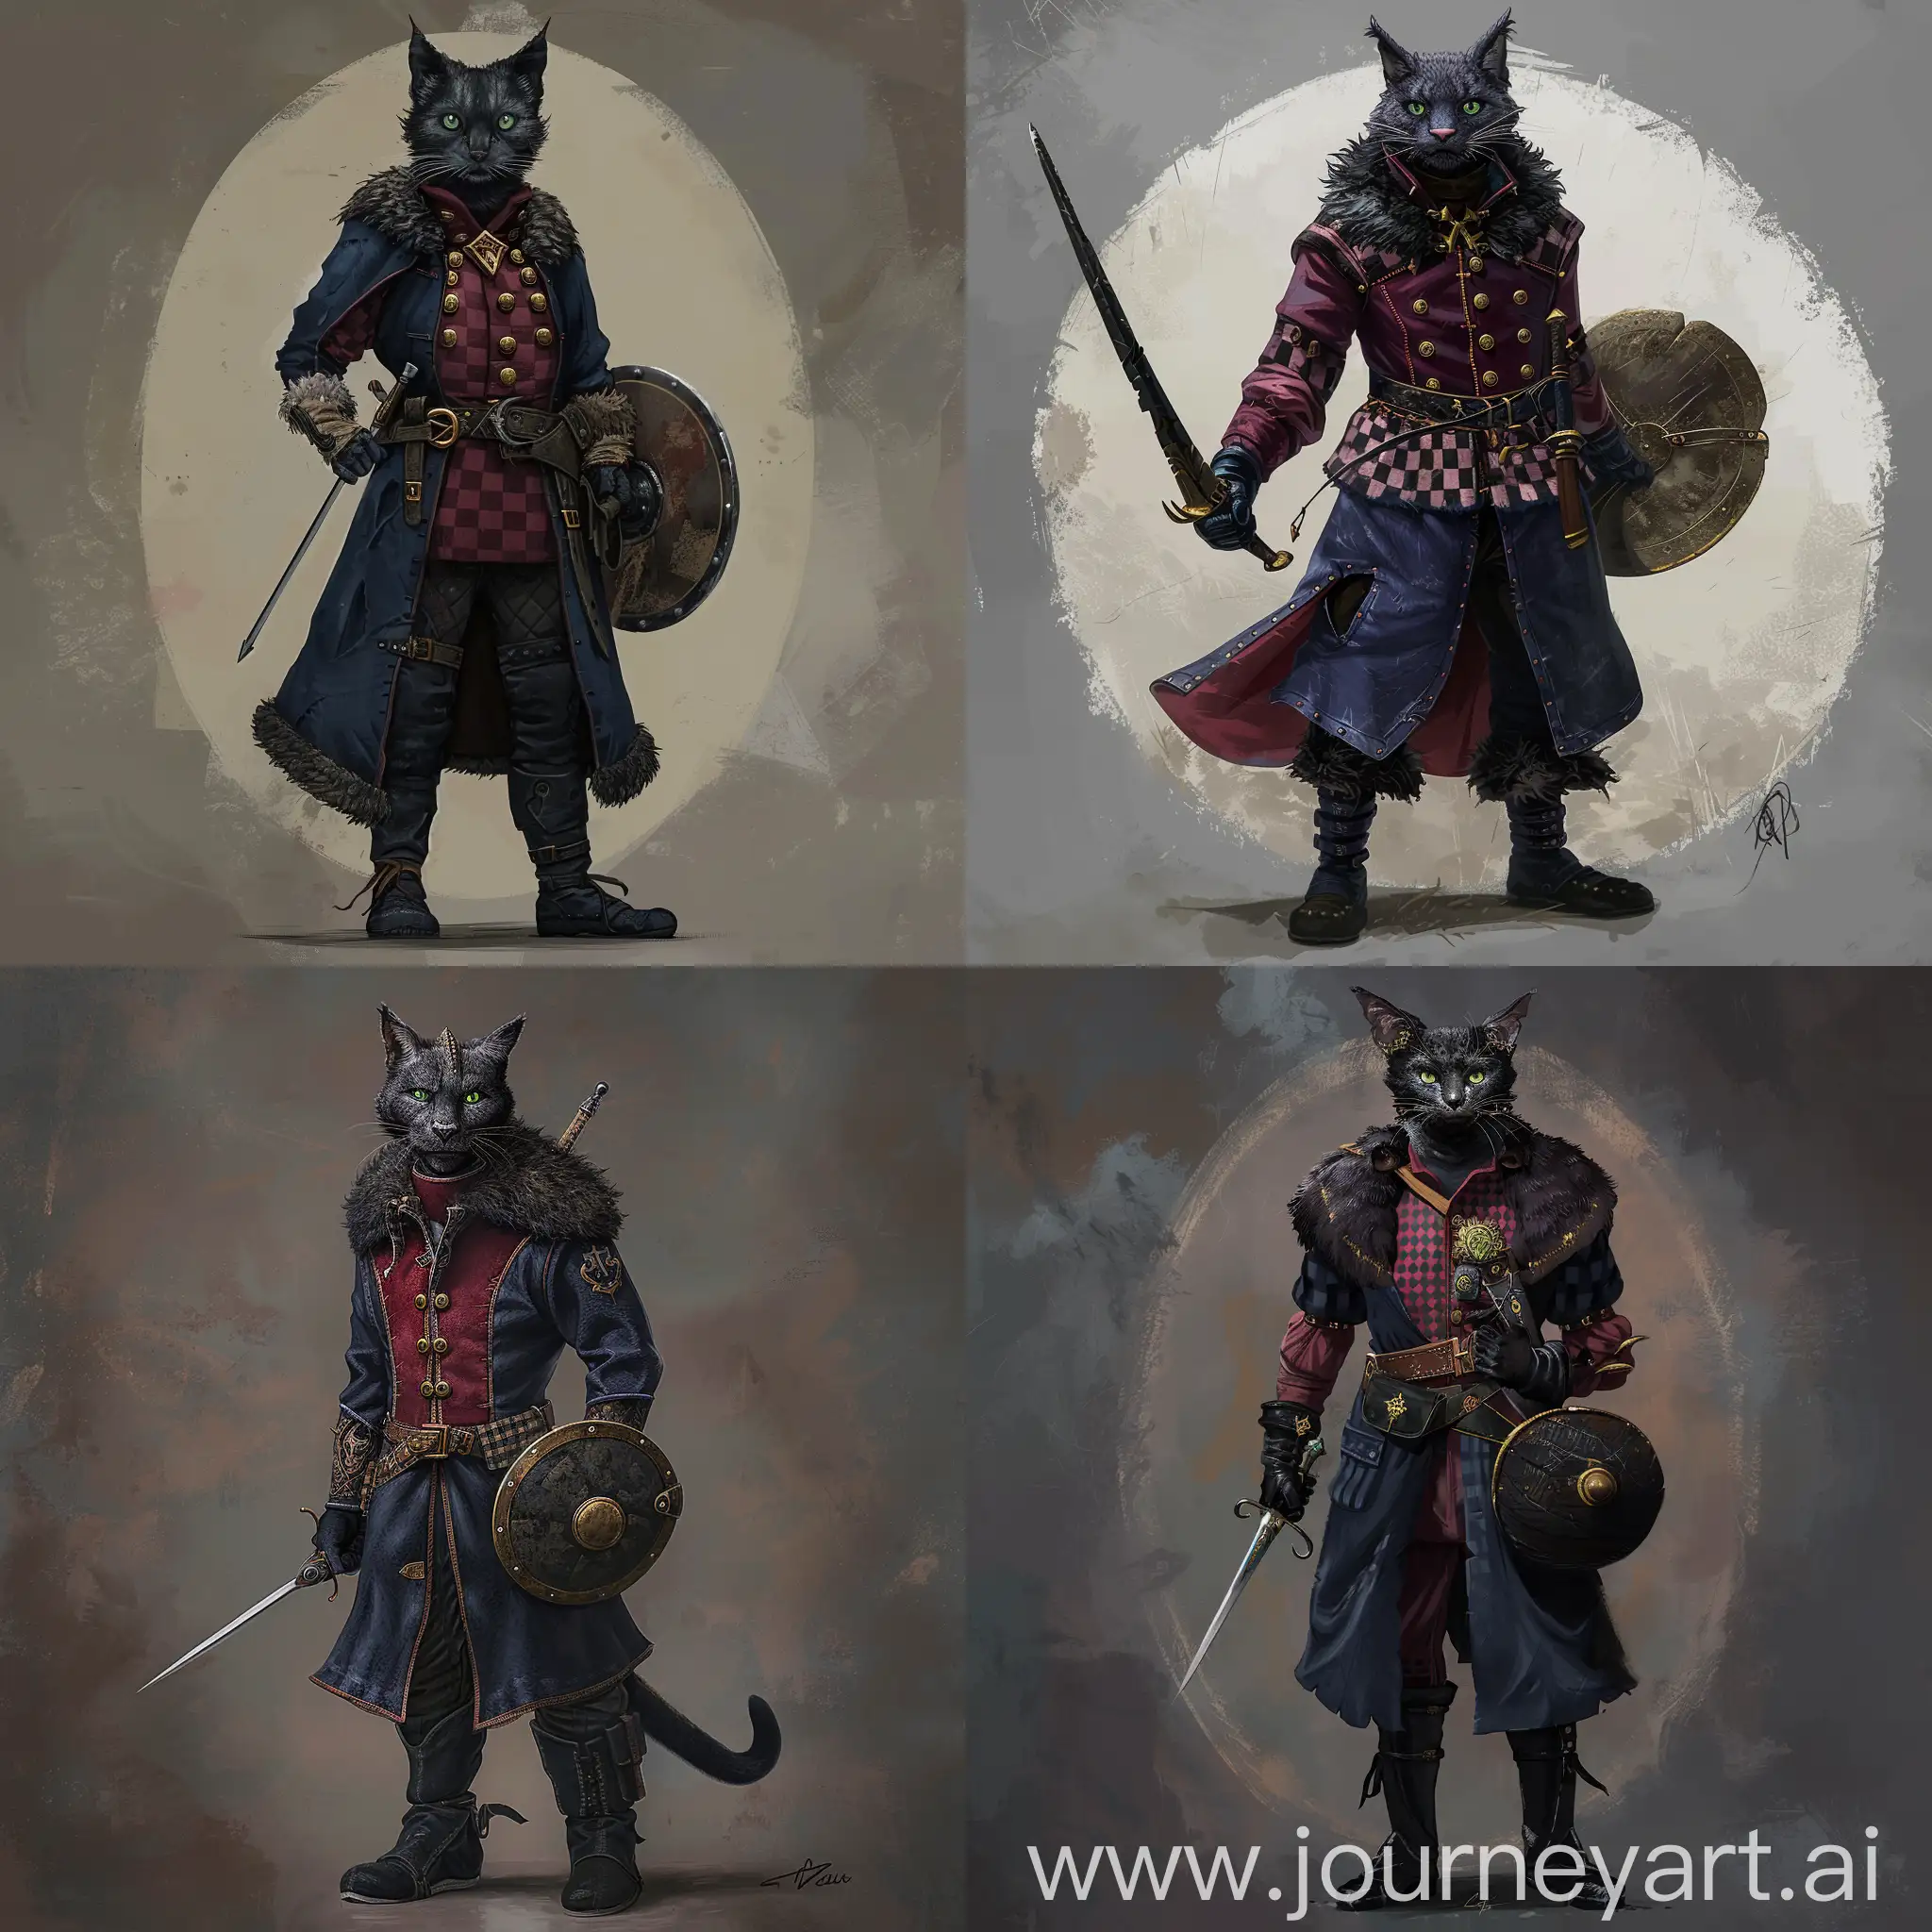 Tabaxi-Rogue-in-Crimson-Shirt-and-Dark-Blue-Coat-with-Rapier-and-Shield